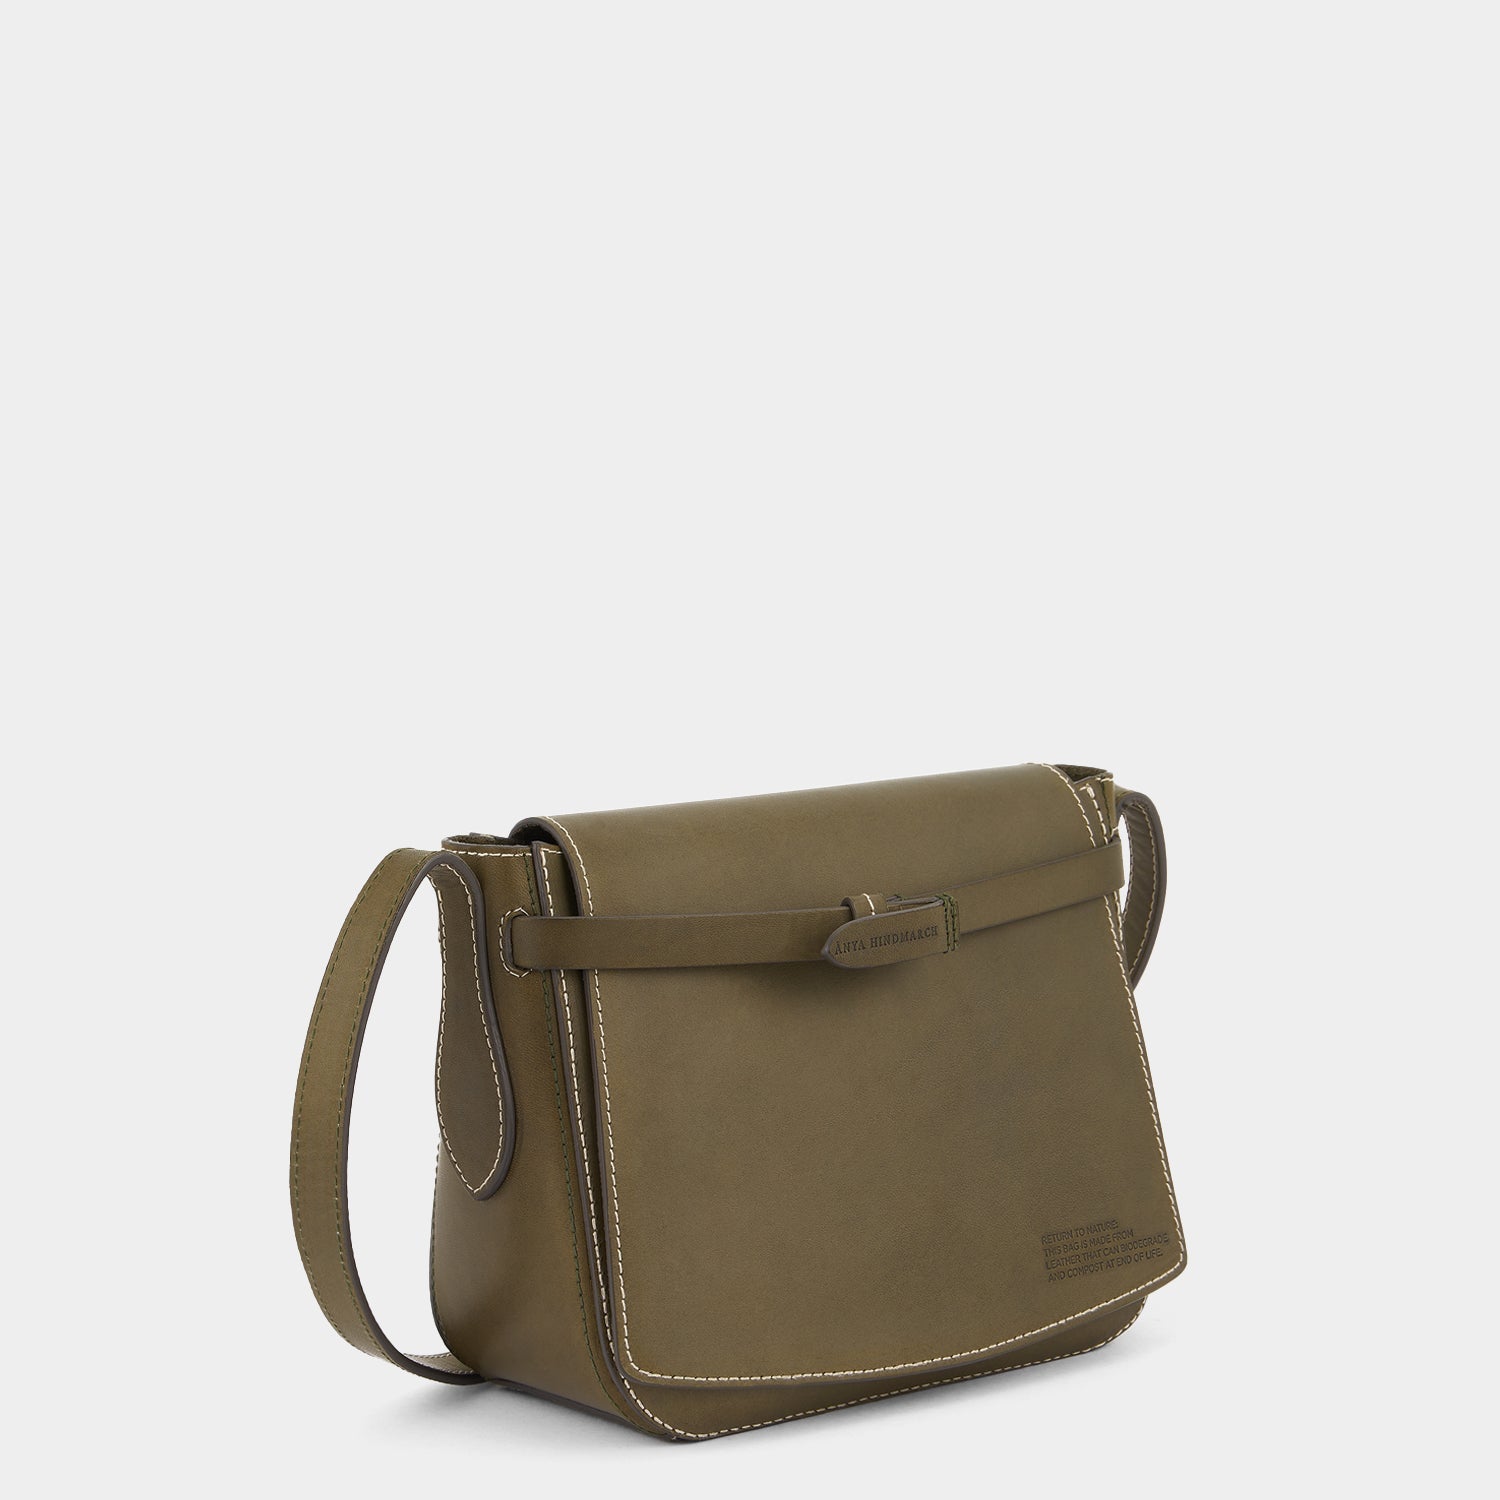 Return to Nature Cross-body -

                  
                    Compostable Leather in Fern -
                  

                  Anya Hindmarch EU
